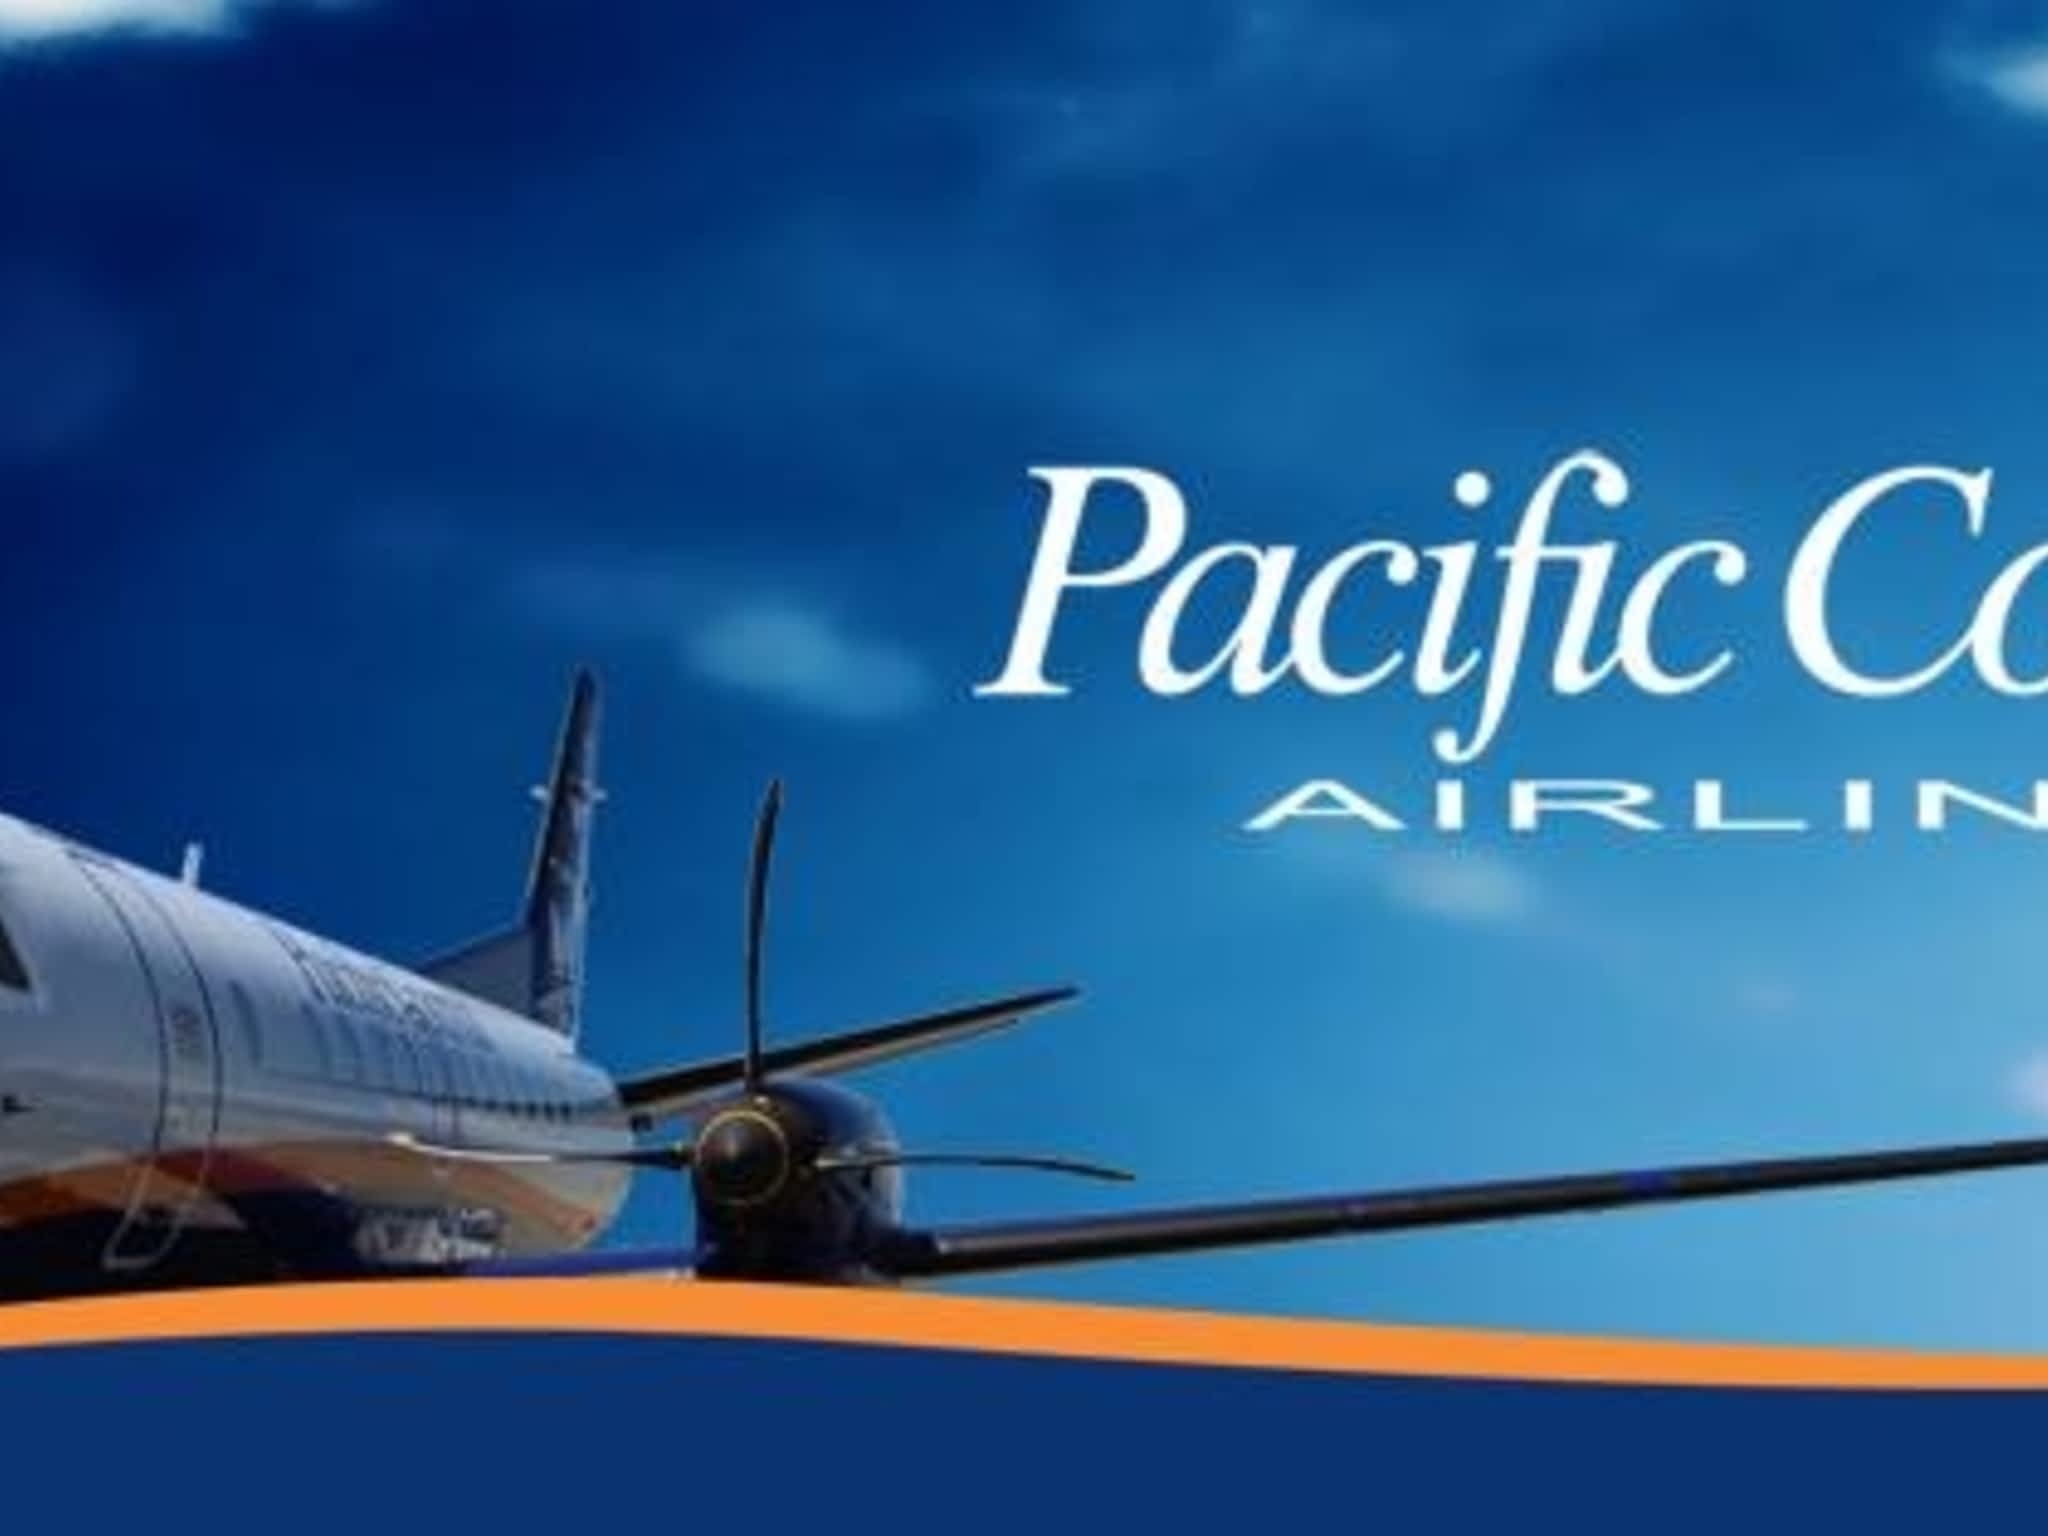 photo Pacific Coastal Airlines